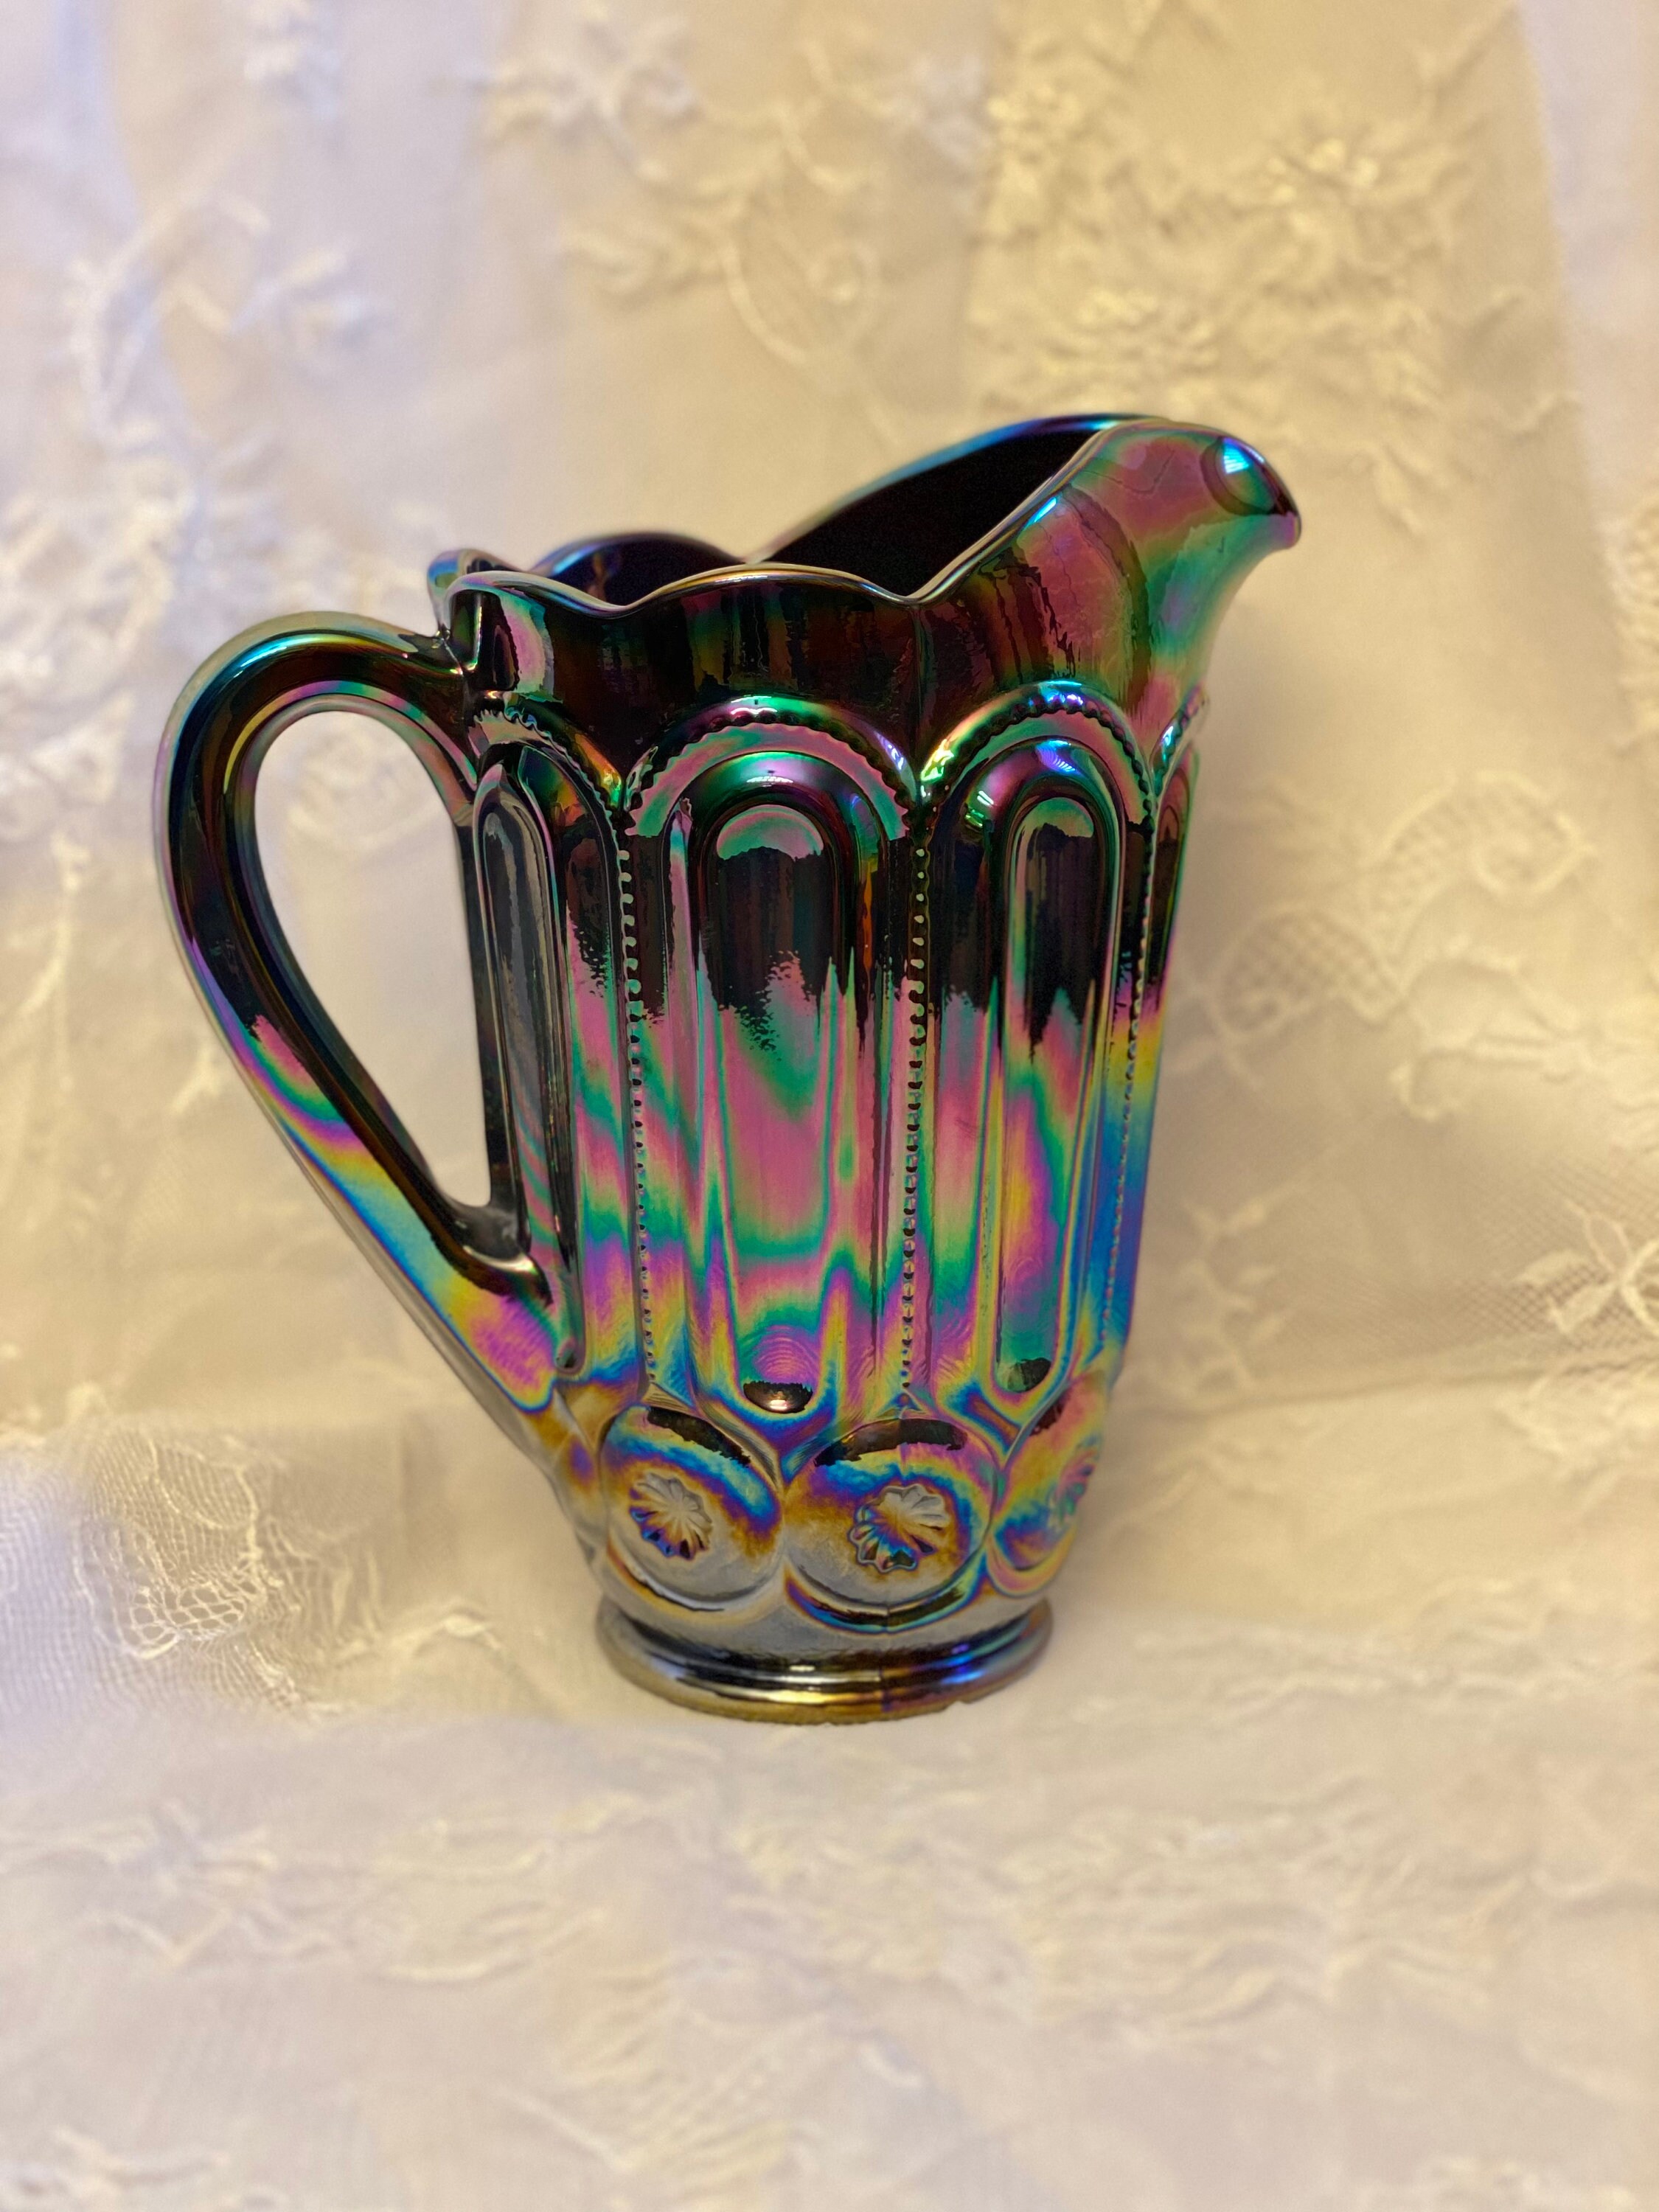 LE Smith Amberina Glass Pitcher Candle Holder 13”